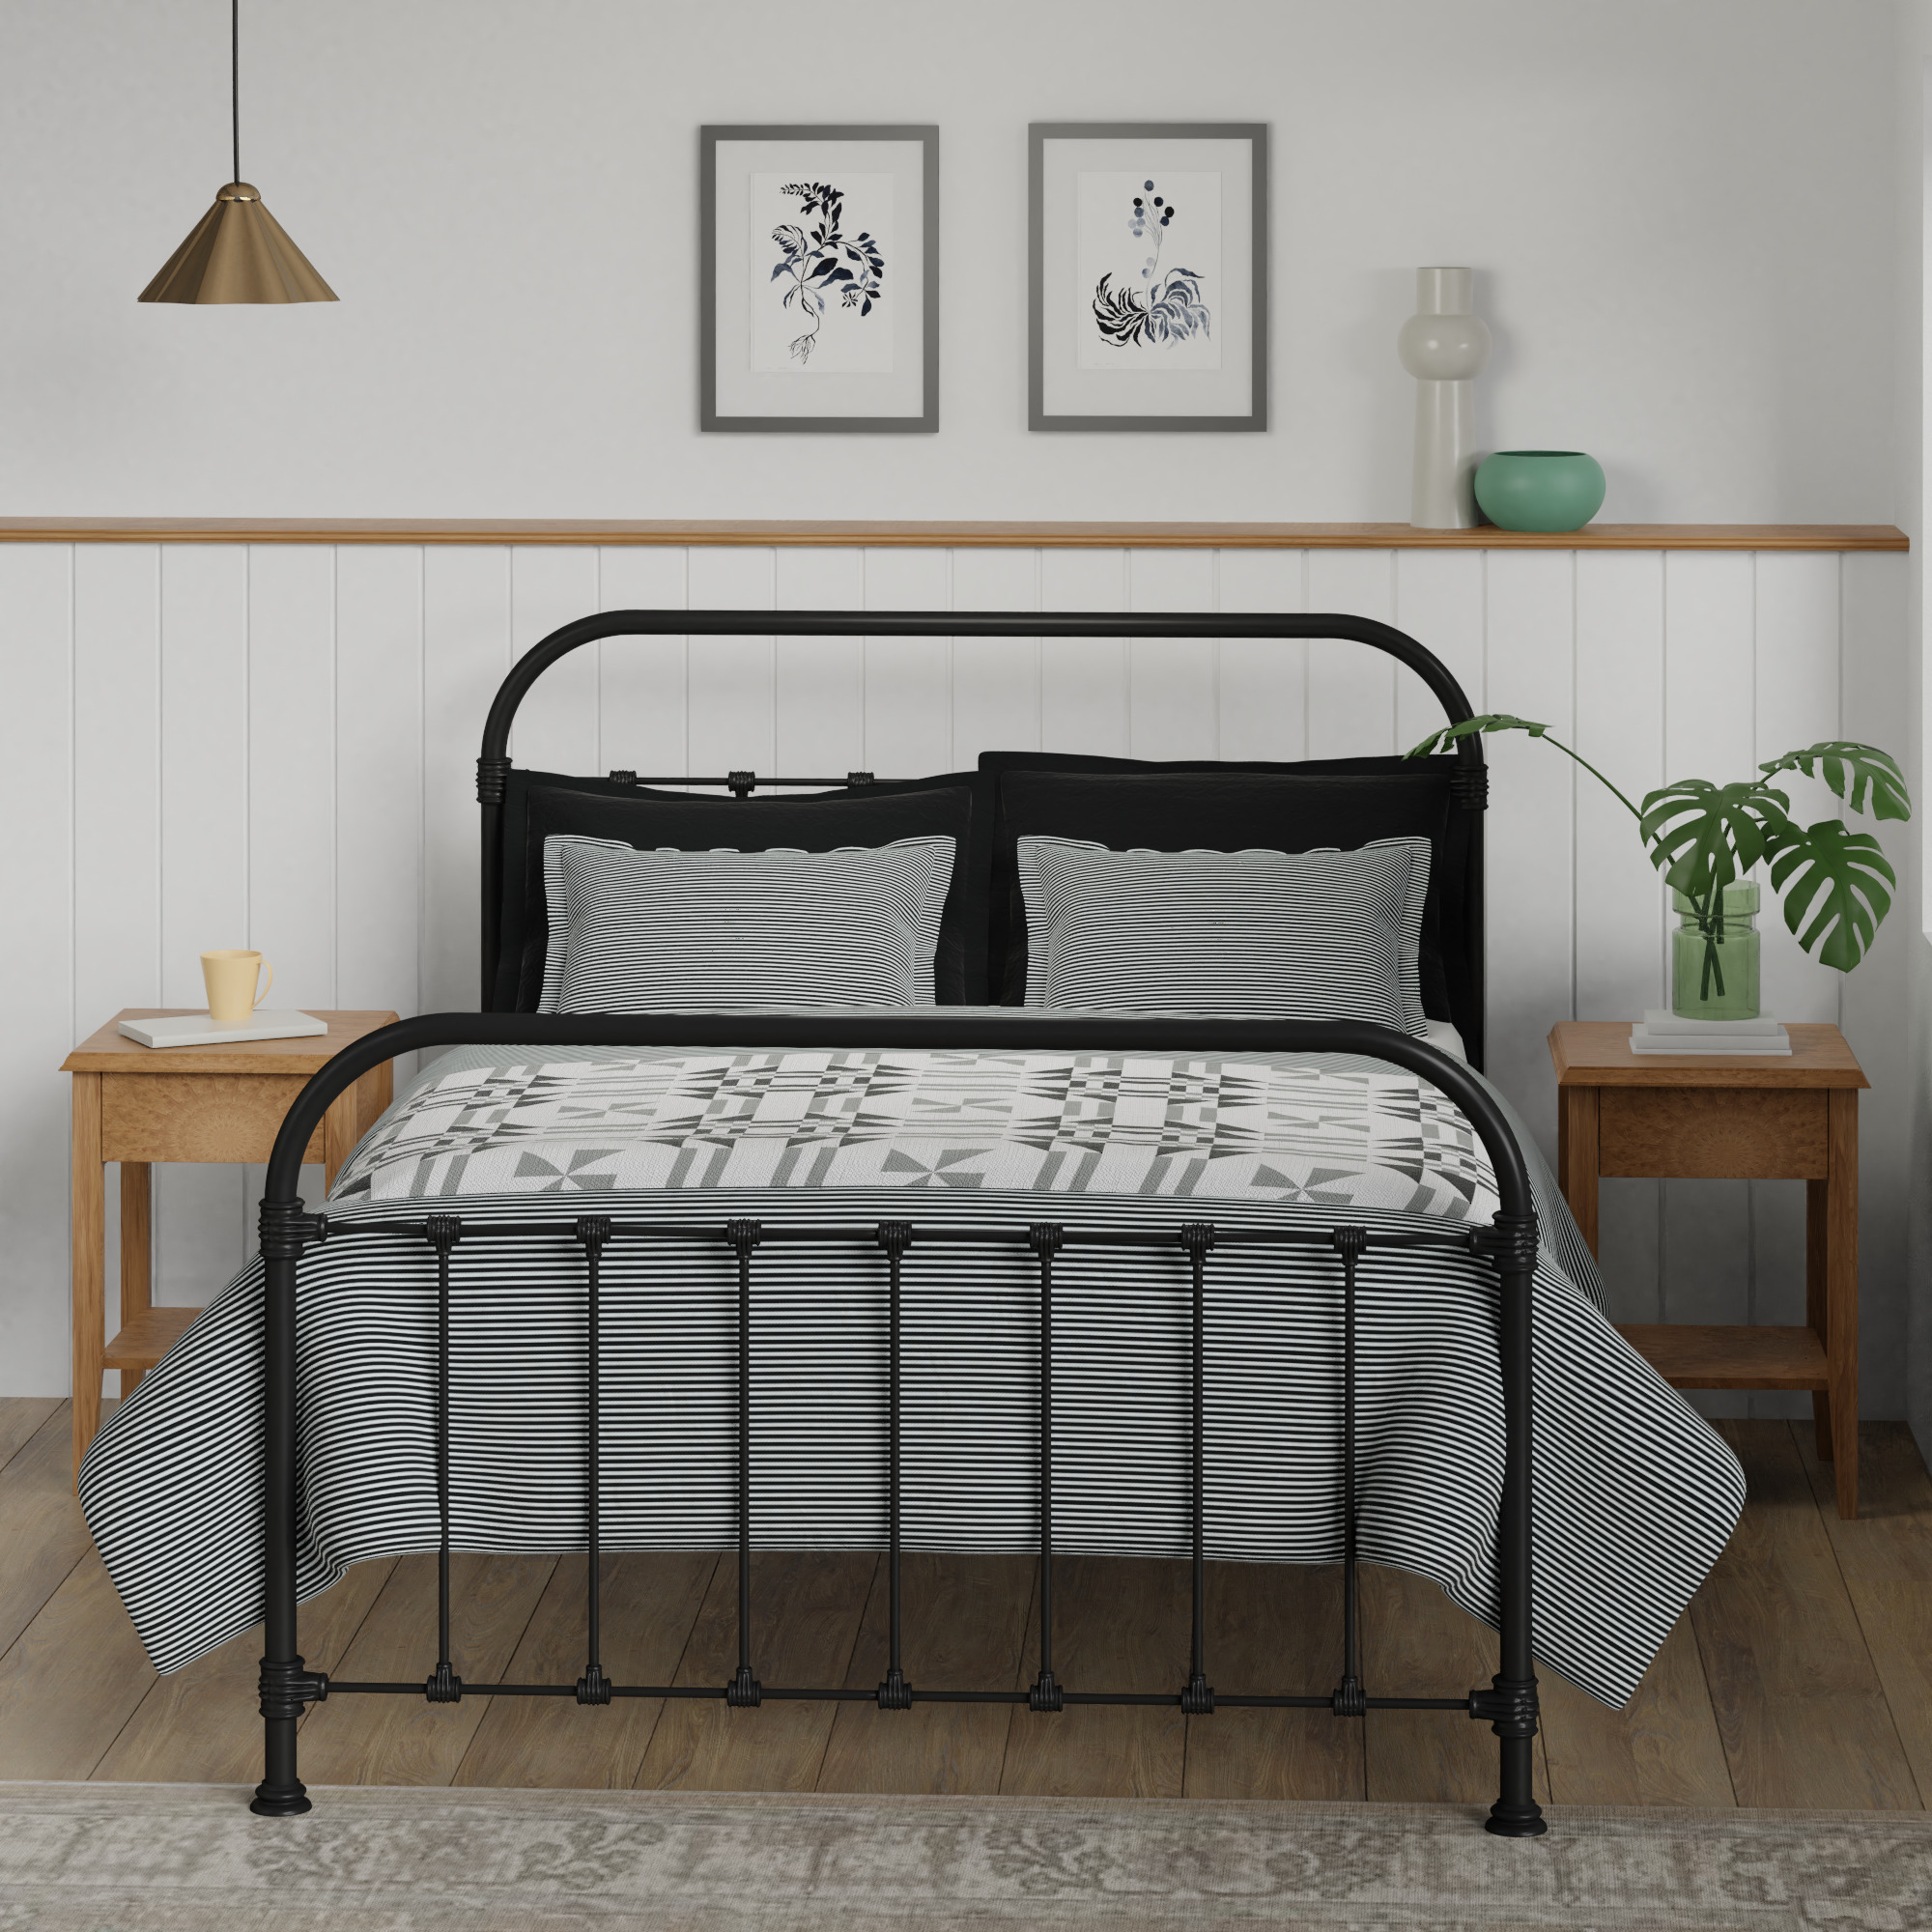 Timolin iron bed - Image black and white